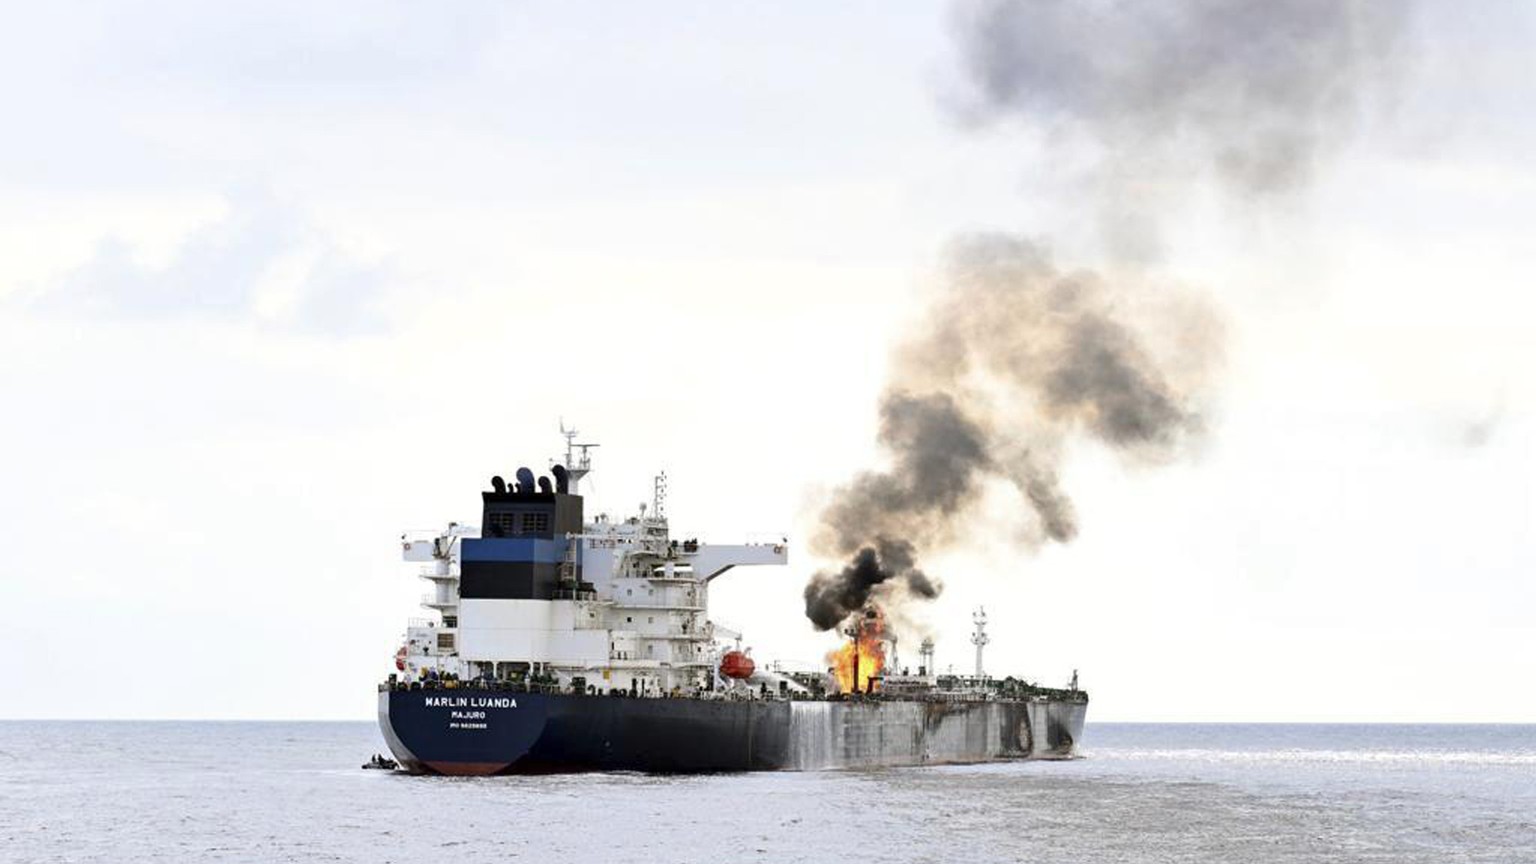 CAPTION CORRECTS LOCATION TO GULF OF ADEN In this photo provided by the Indian Navy on Saturday, Jan. 27, 2024, a view of the oil tanker Marlin Luanda on fire after an attack, in the Gulf of Aden. The ...